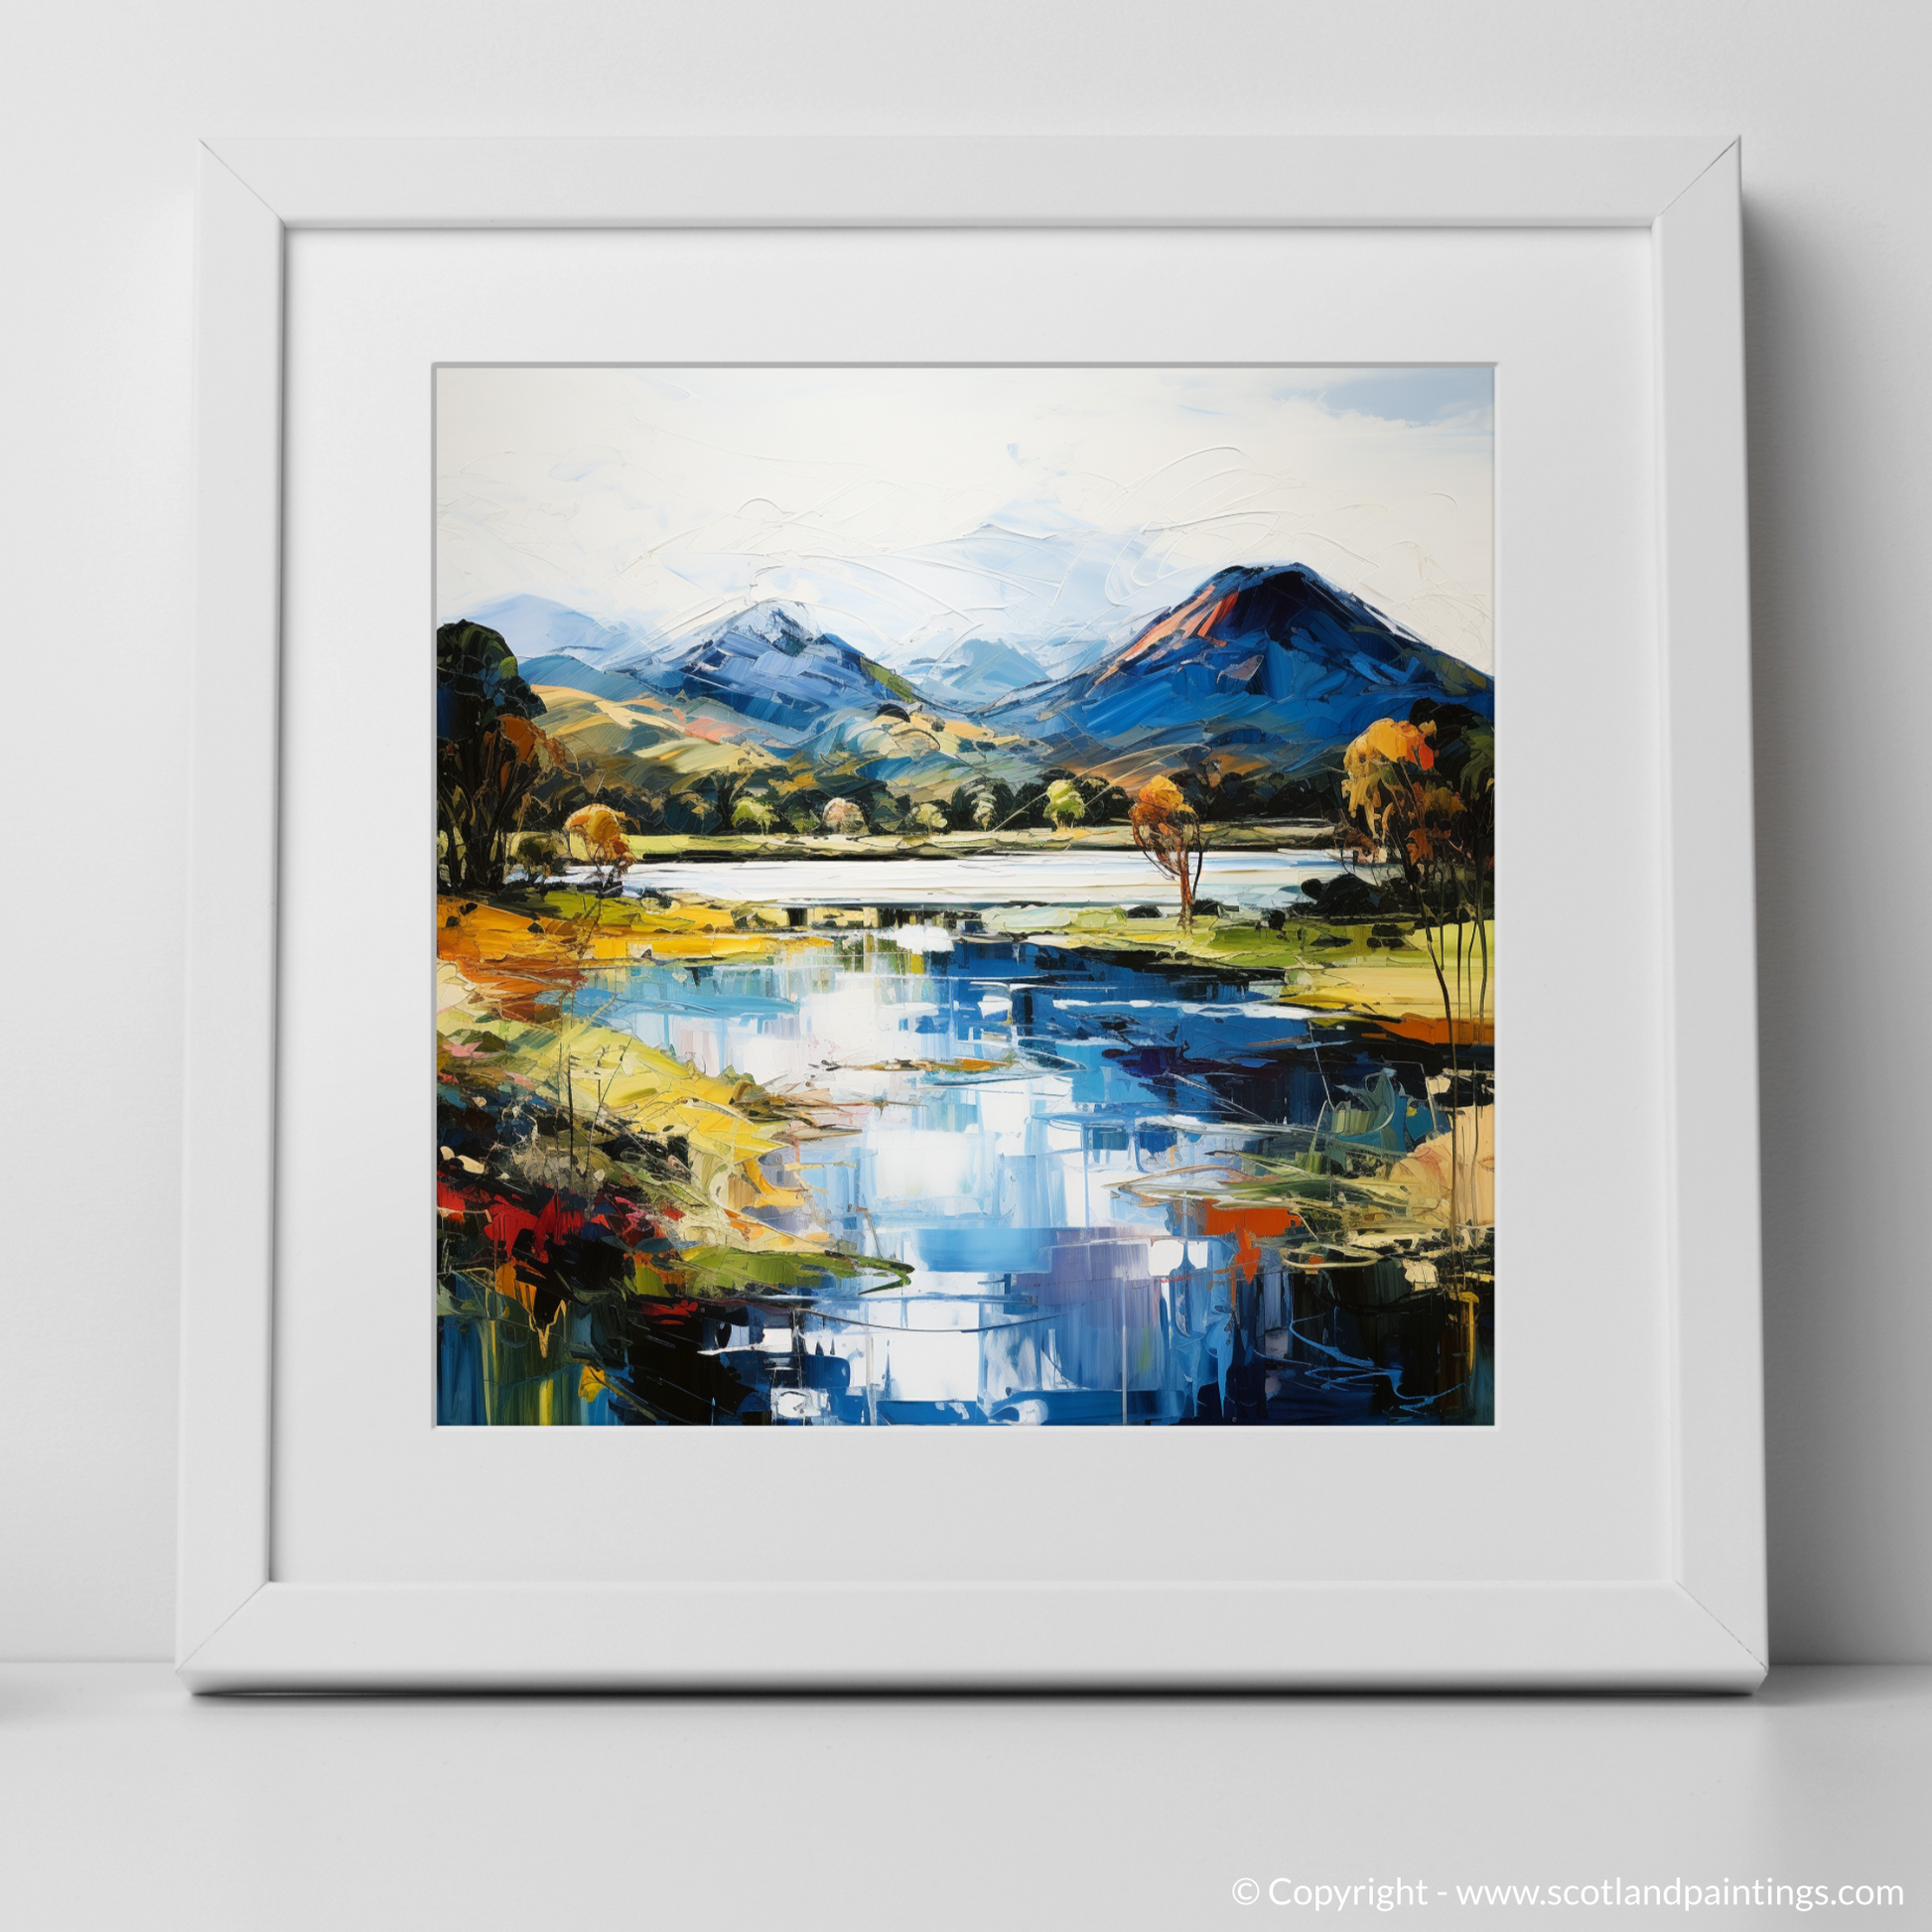 Art Print of Loch Ard, Stirling with a white frame